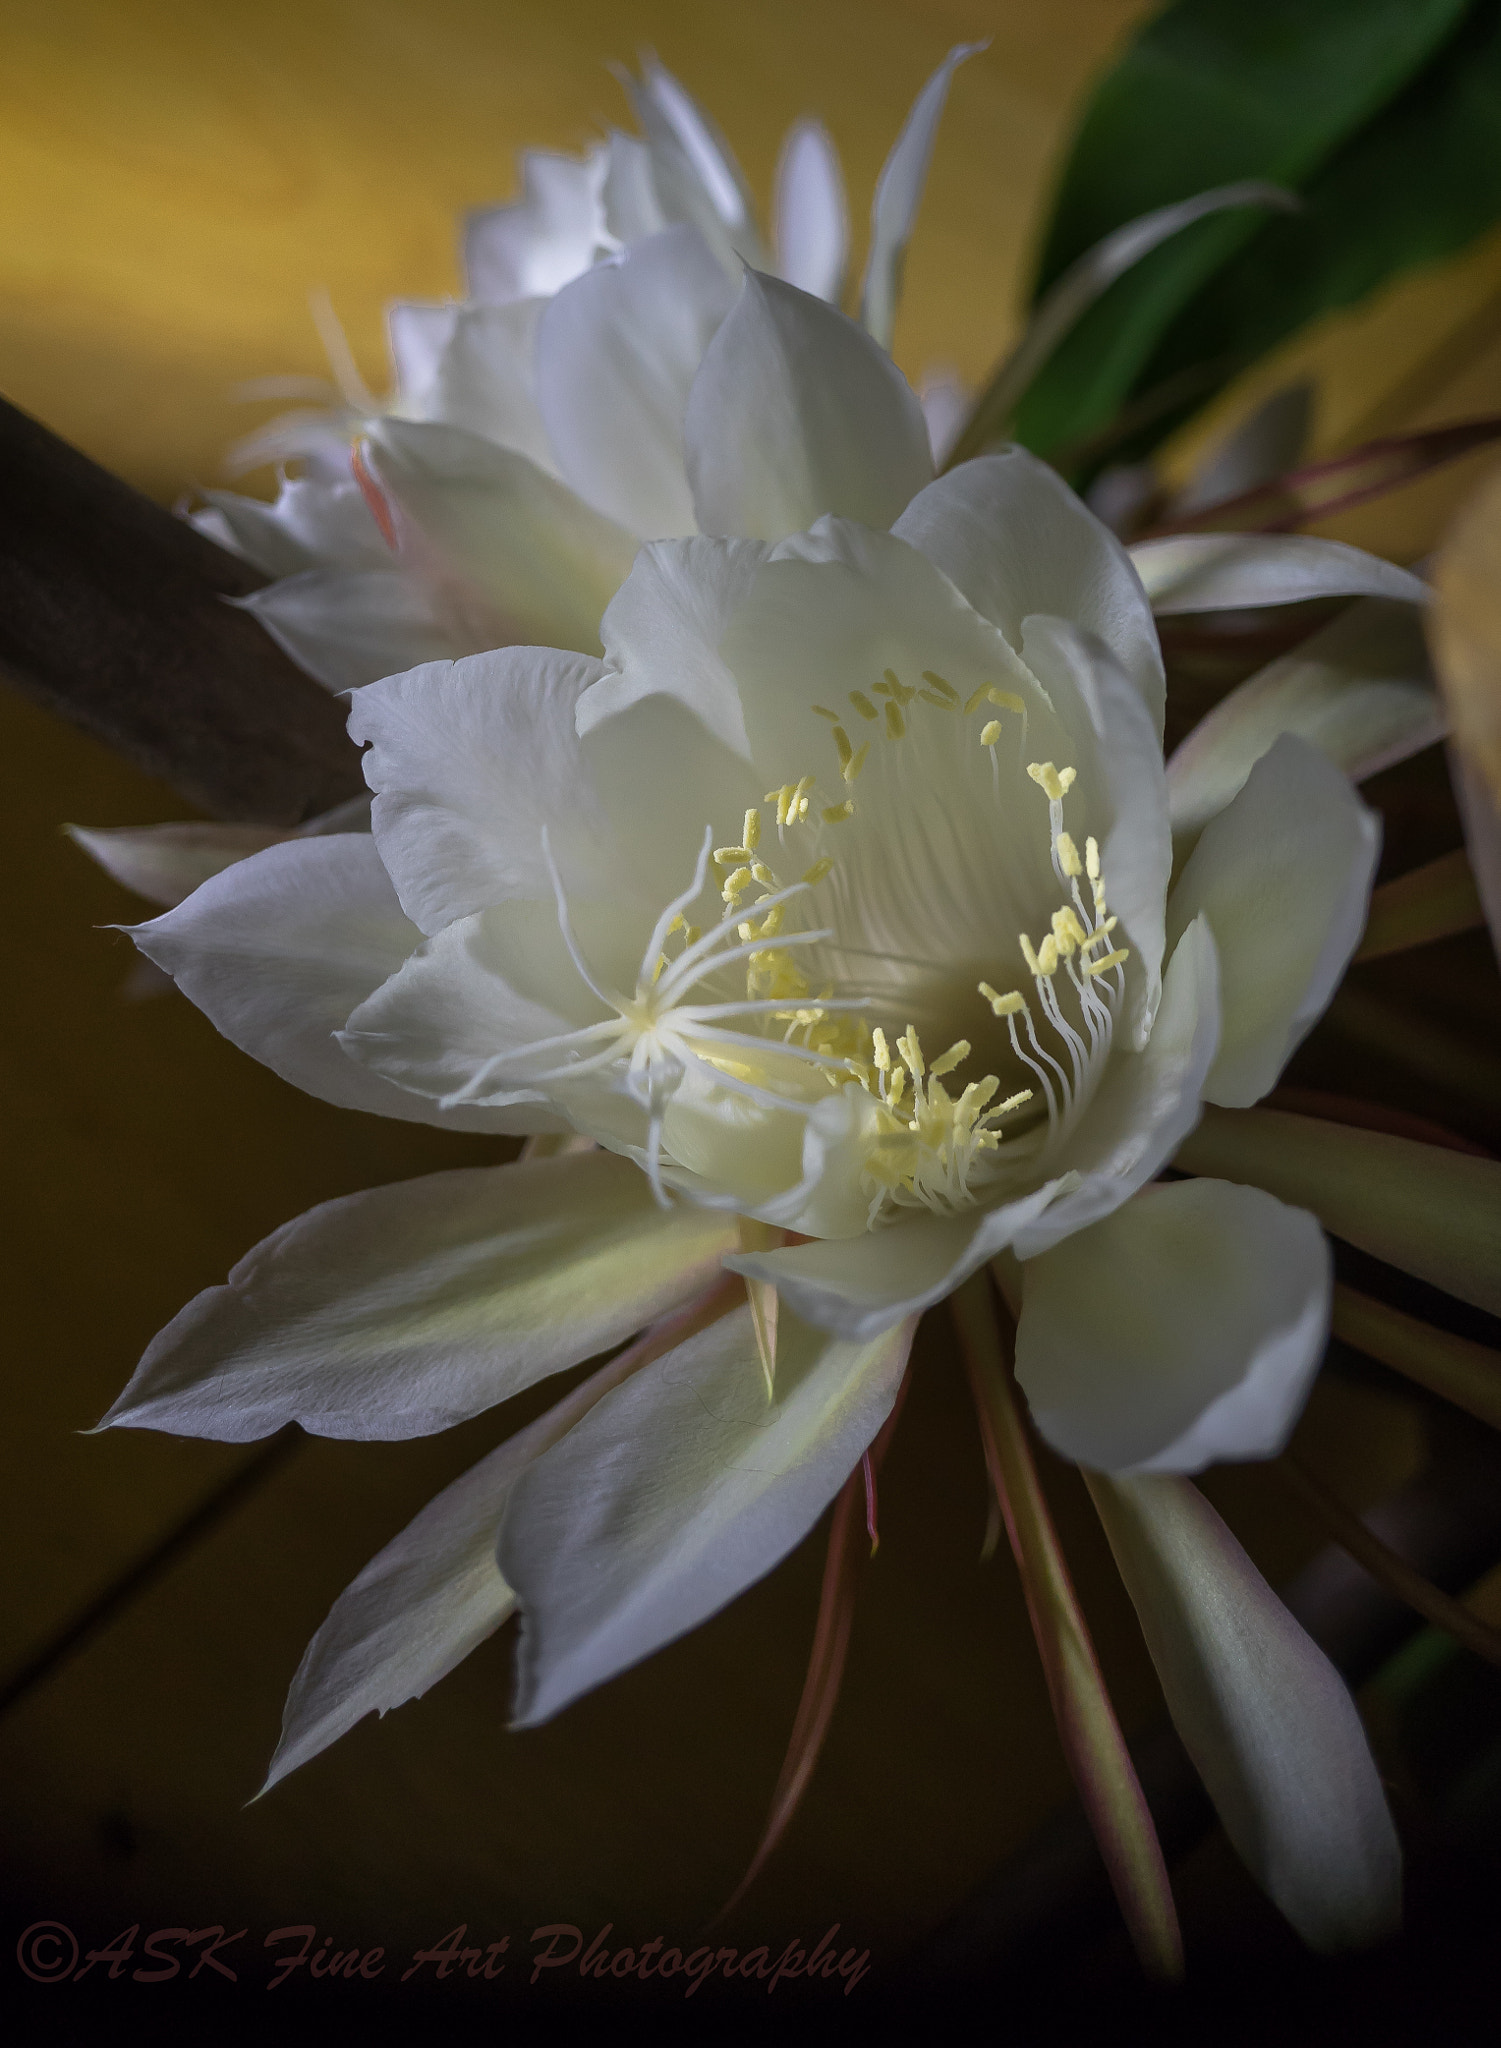 Sony a7 + Sony E 30mm F3.5 Macro sample photo. Night blooming cereus great beauty finding its expression only when things seem the darkest photography